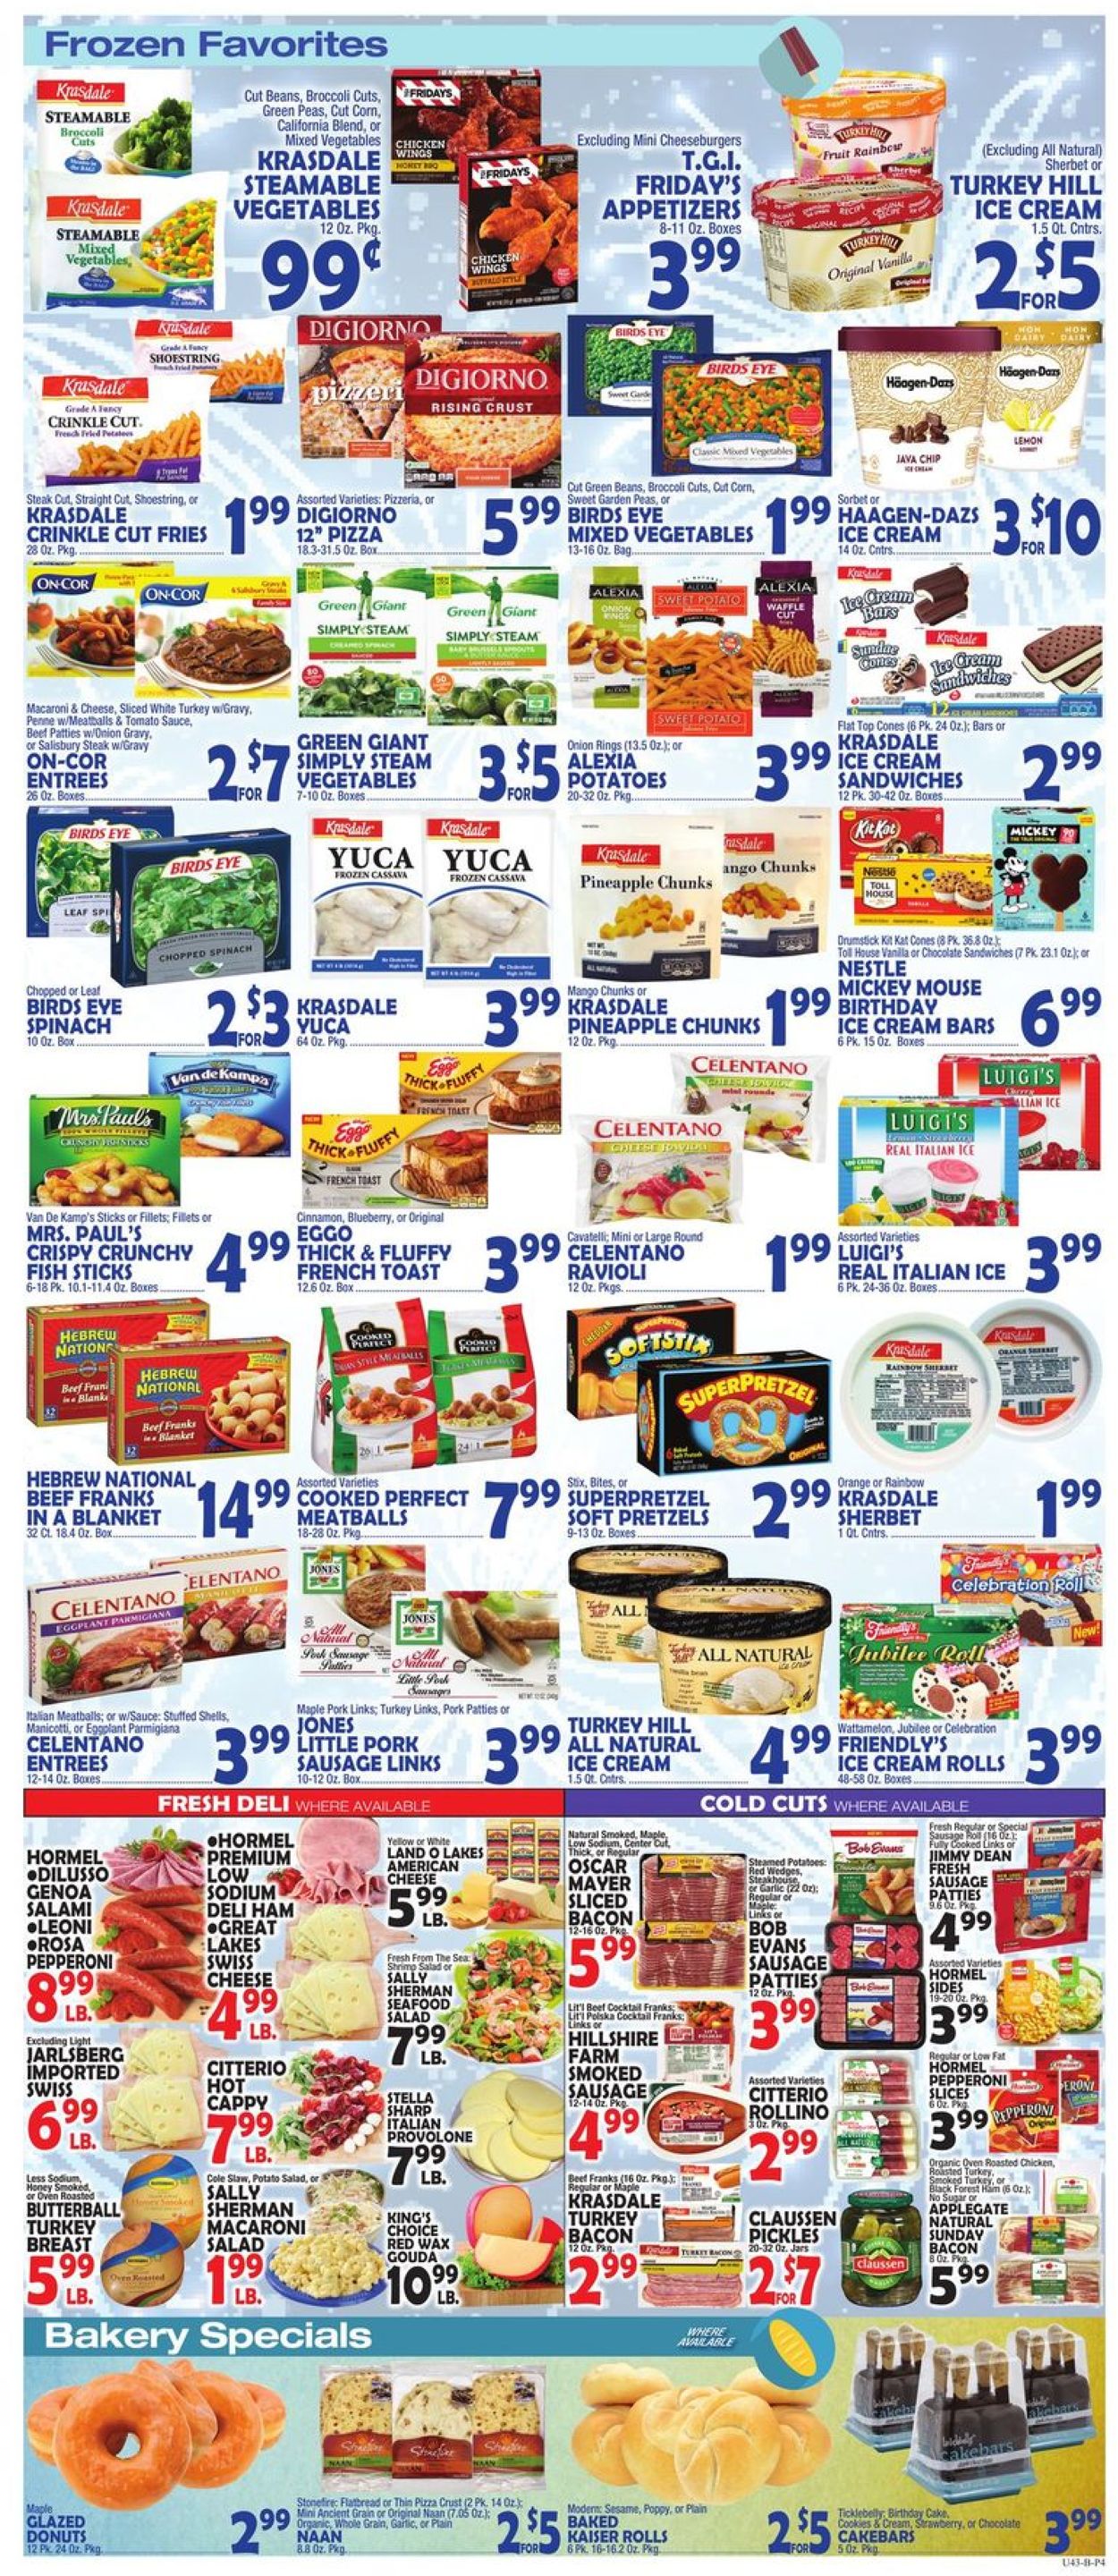 Catalogue Bravo Supermarkets - New Year's Ad 2019/2020 from 12/27/2019